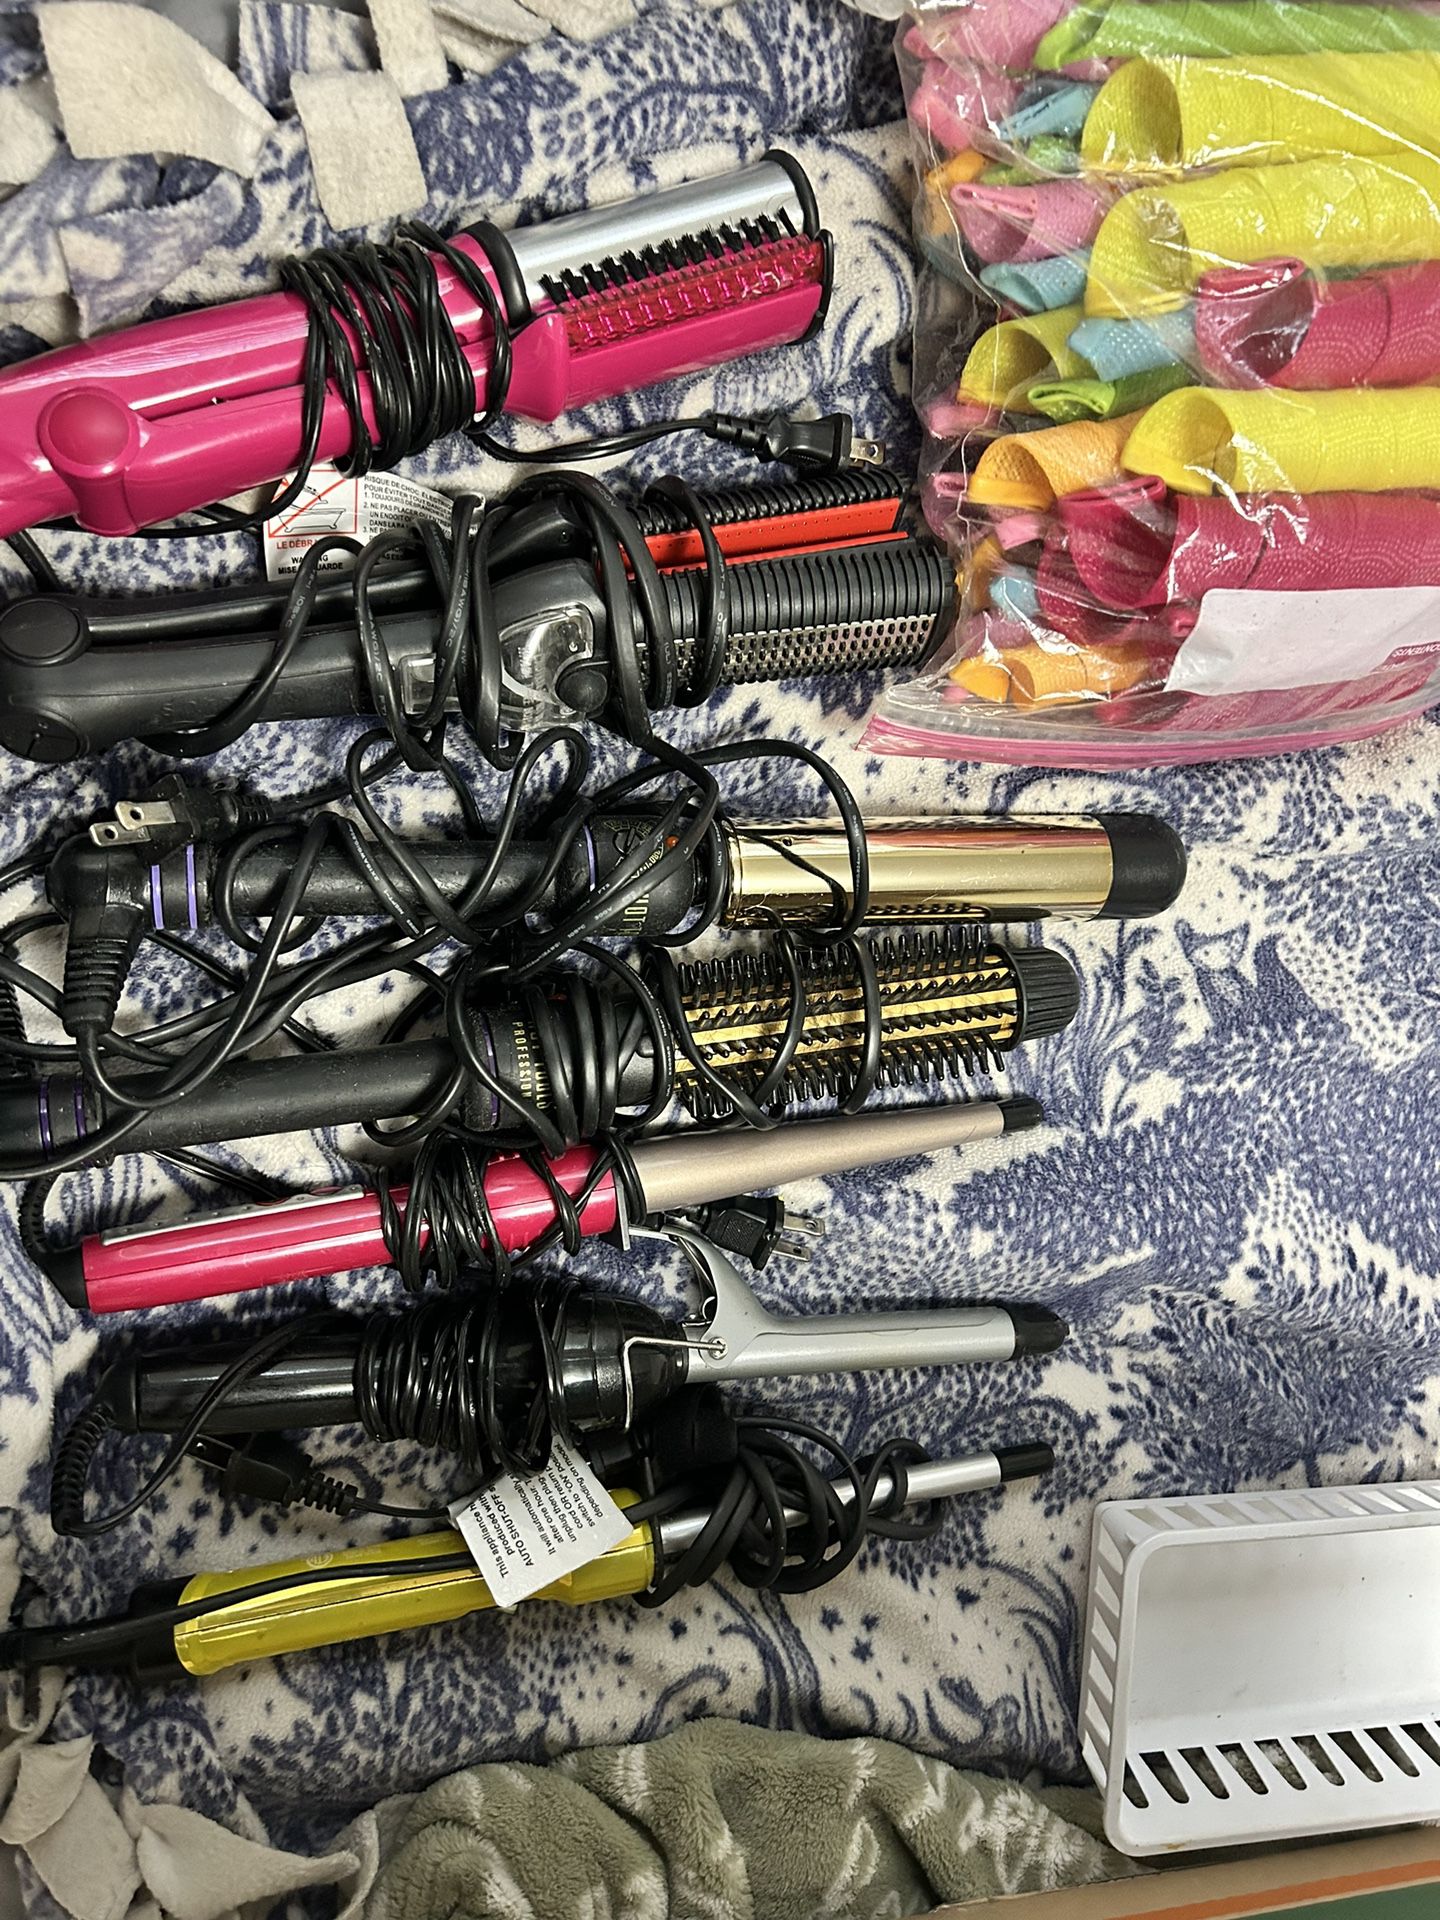 hair curlers\ curling iron and straighteners